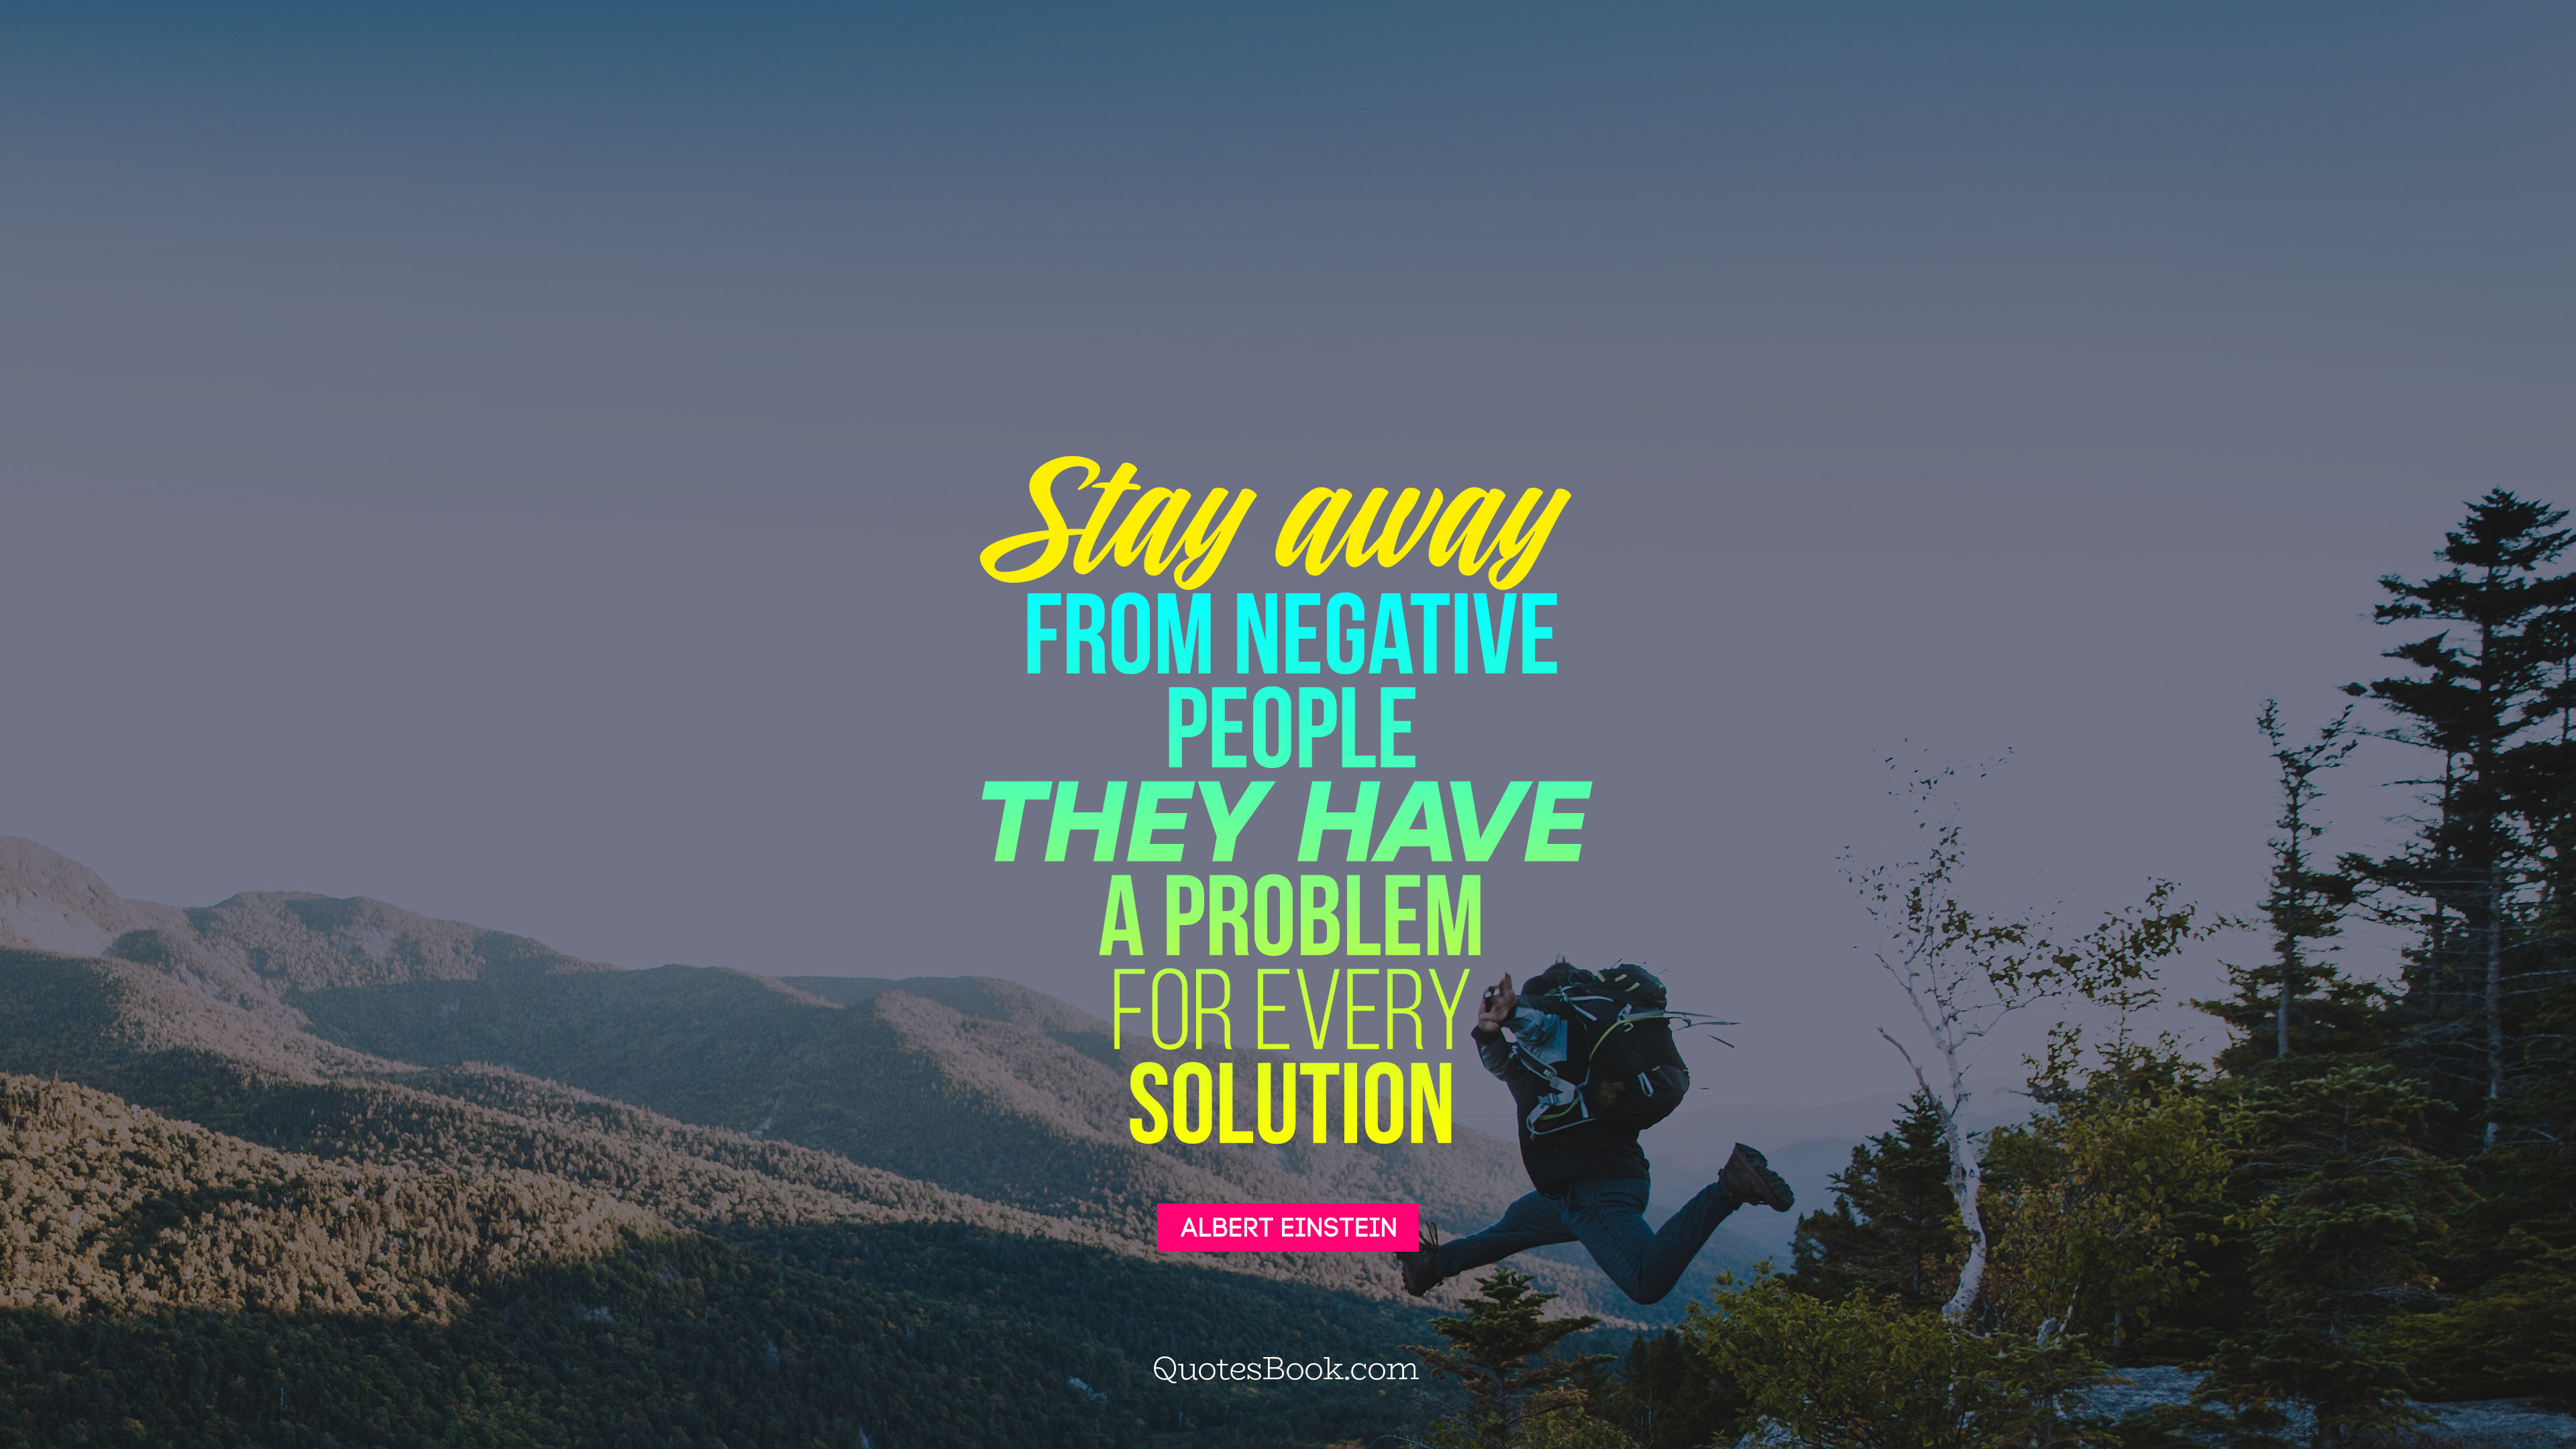 stay away from negative people they have a problem for 3840x2160 1824